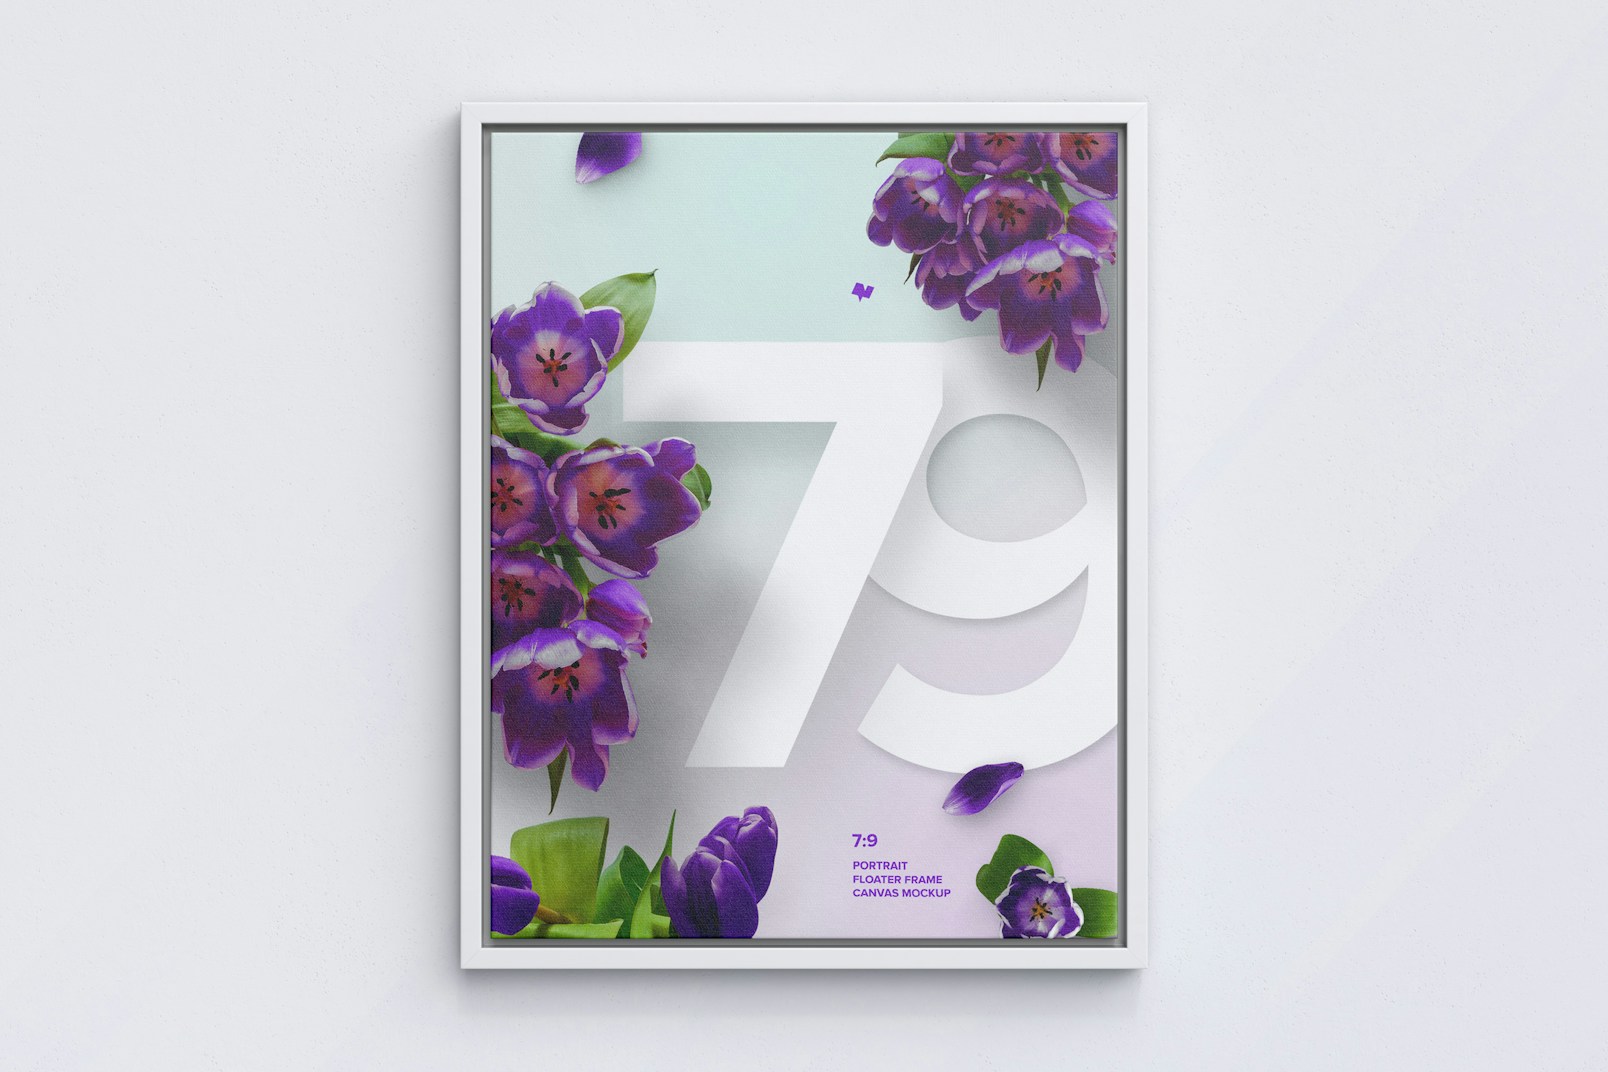 7:9 Portrait Canvas Mockup in Floater Frame, Front View